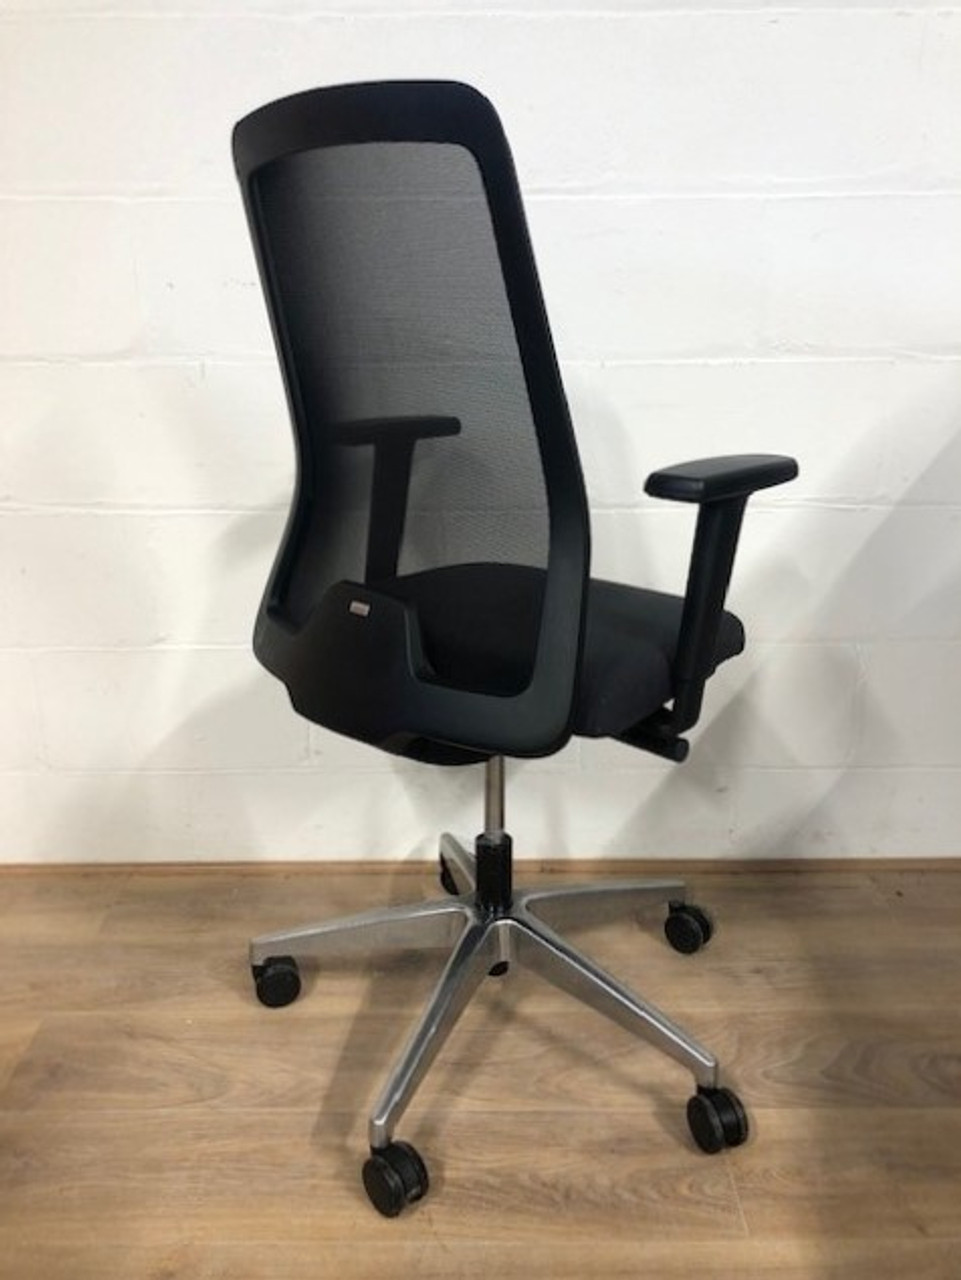 Second hand office furniture essex_Interstuhl refurbished chairs_used office chairs to buy chelmsford_second hand office chairs chelmsford essex